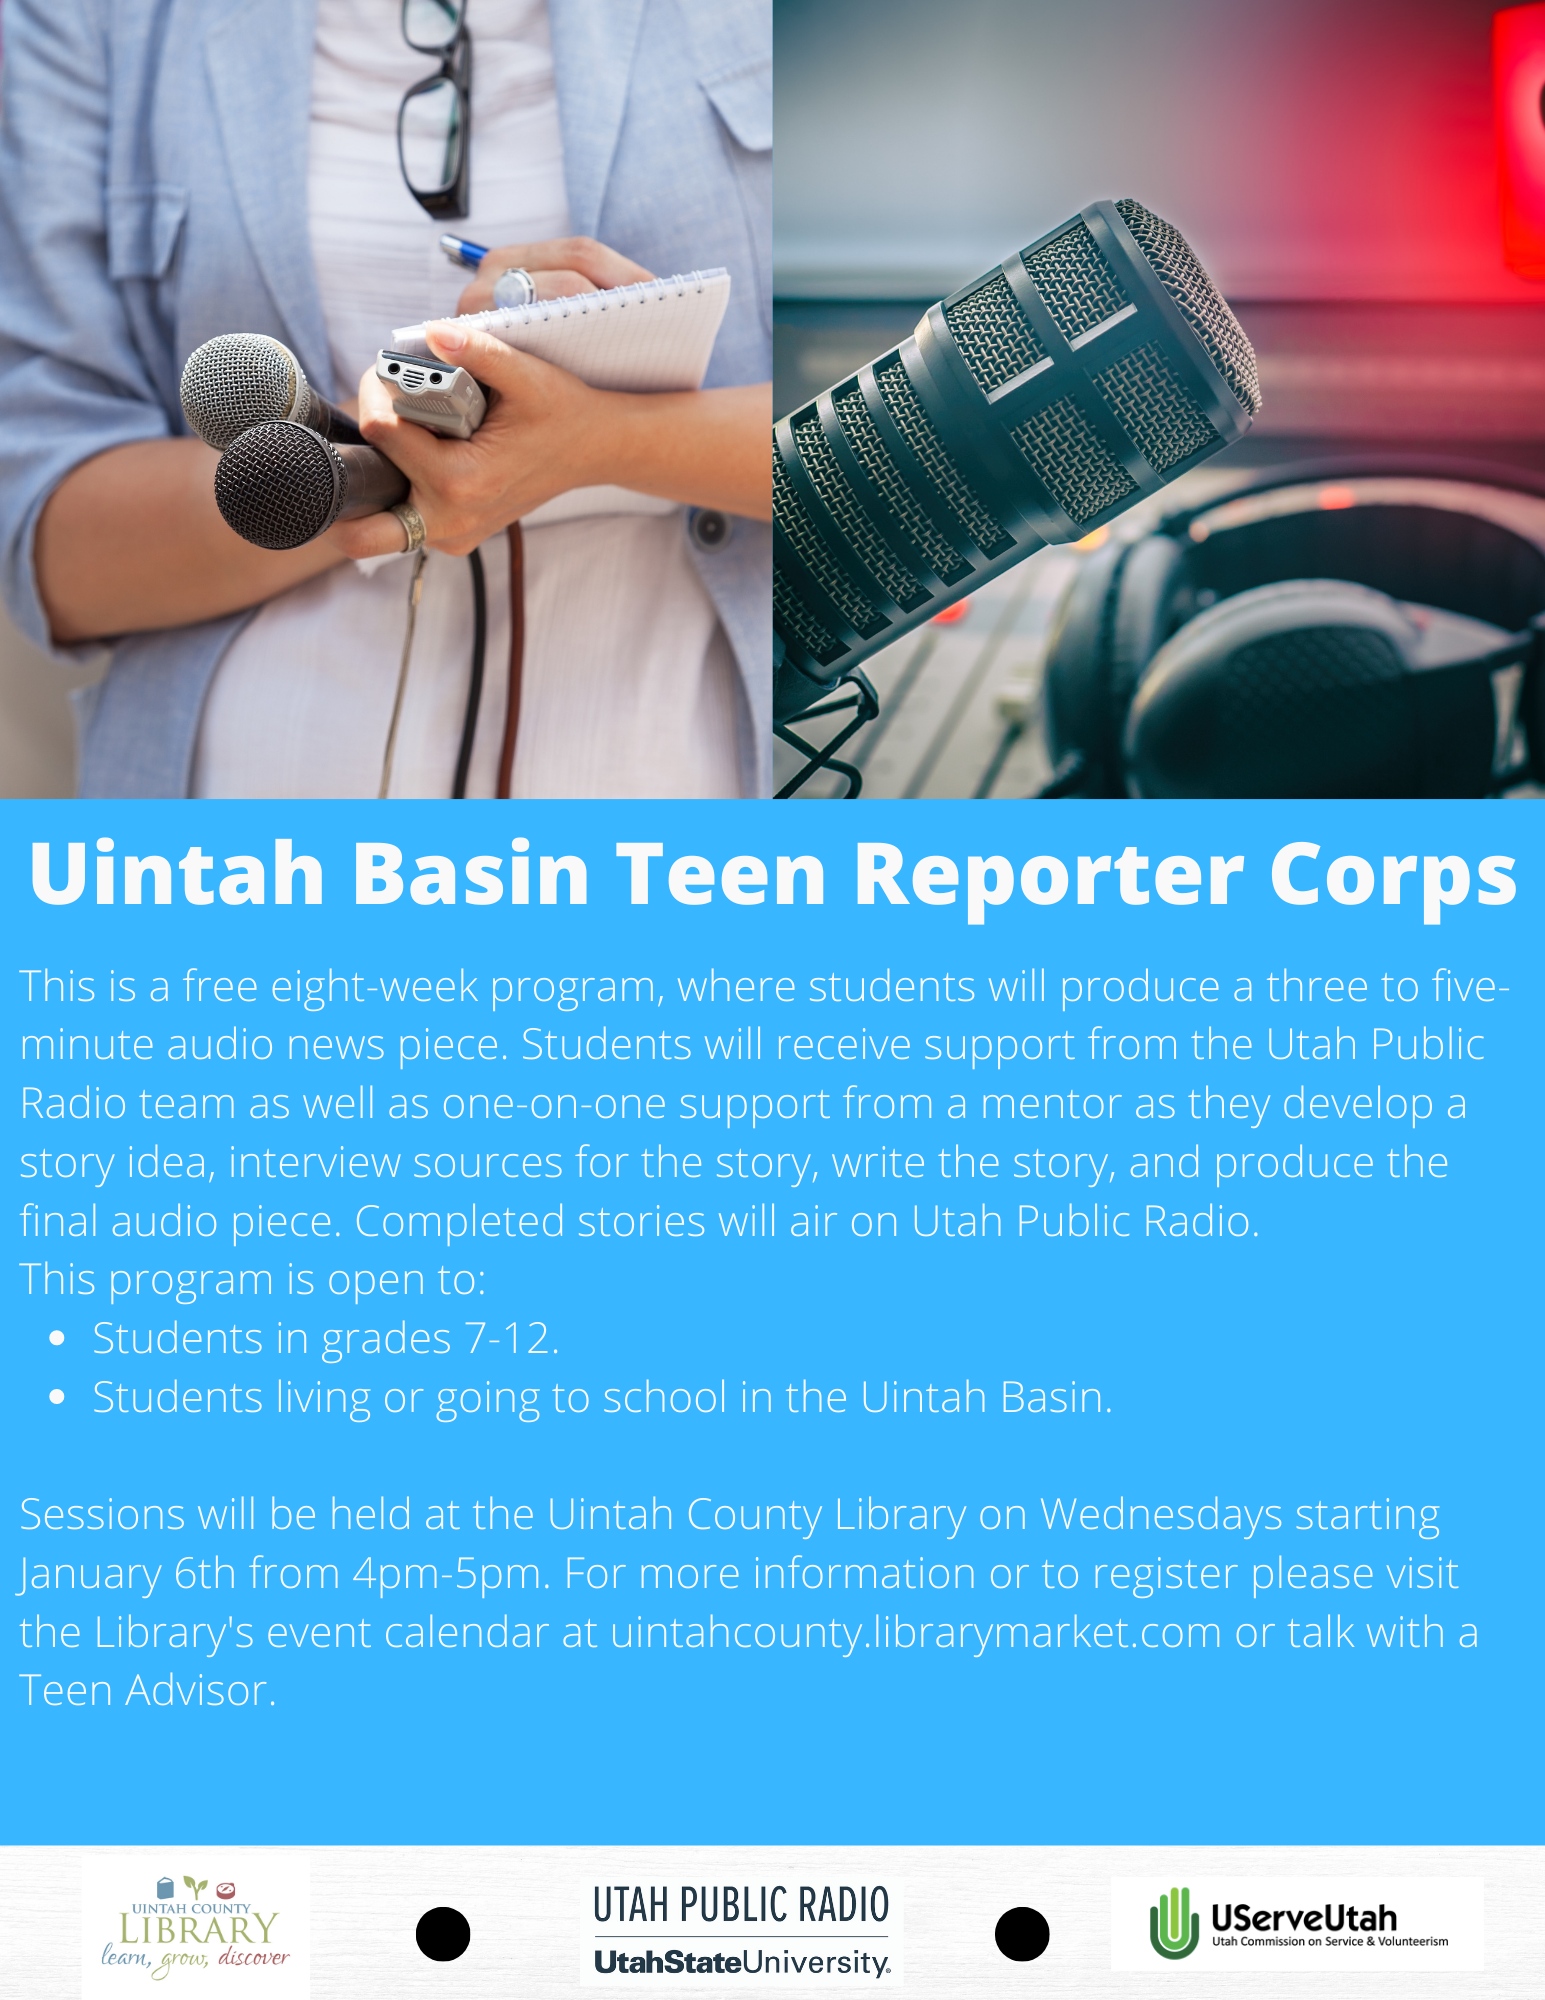 Blue background with Uintah Basin Teen Reporter Corps in white. Information text in white as well. Same information as in the description. 